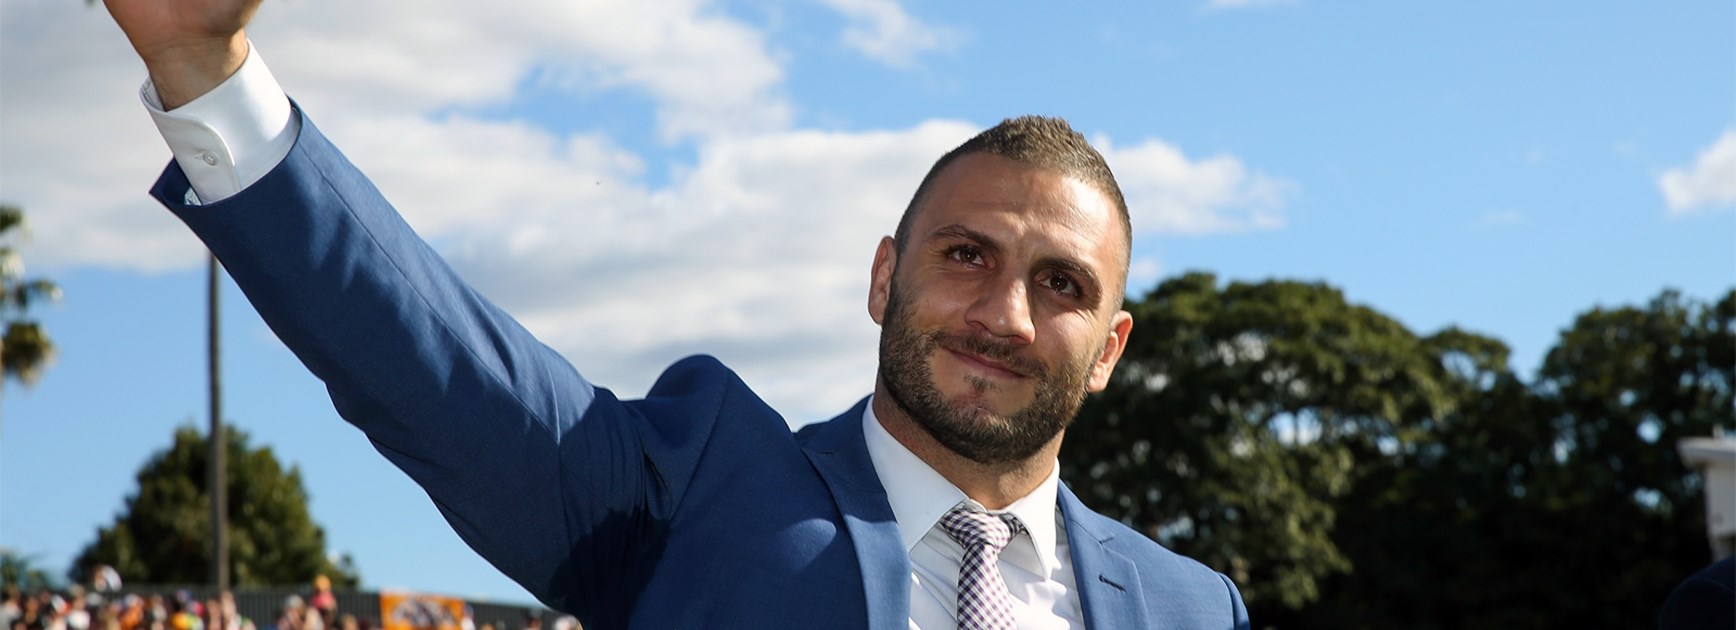 Robbie Farah waves to the crowd at half-time of the Tigers' final game of the 2016 season.